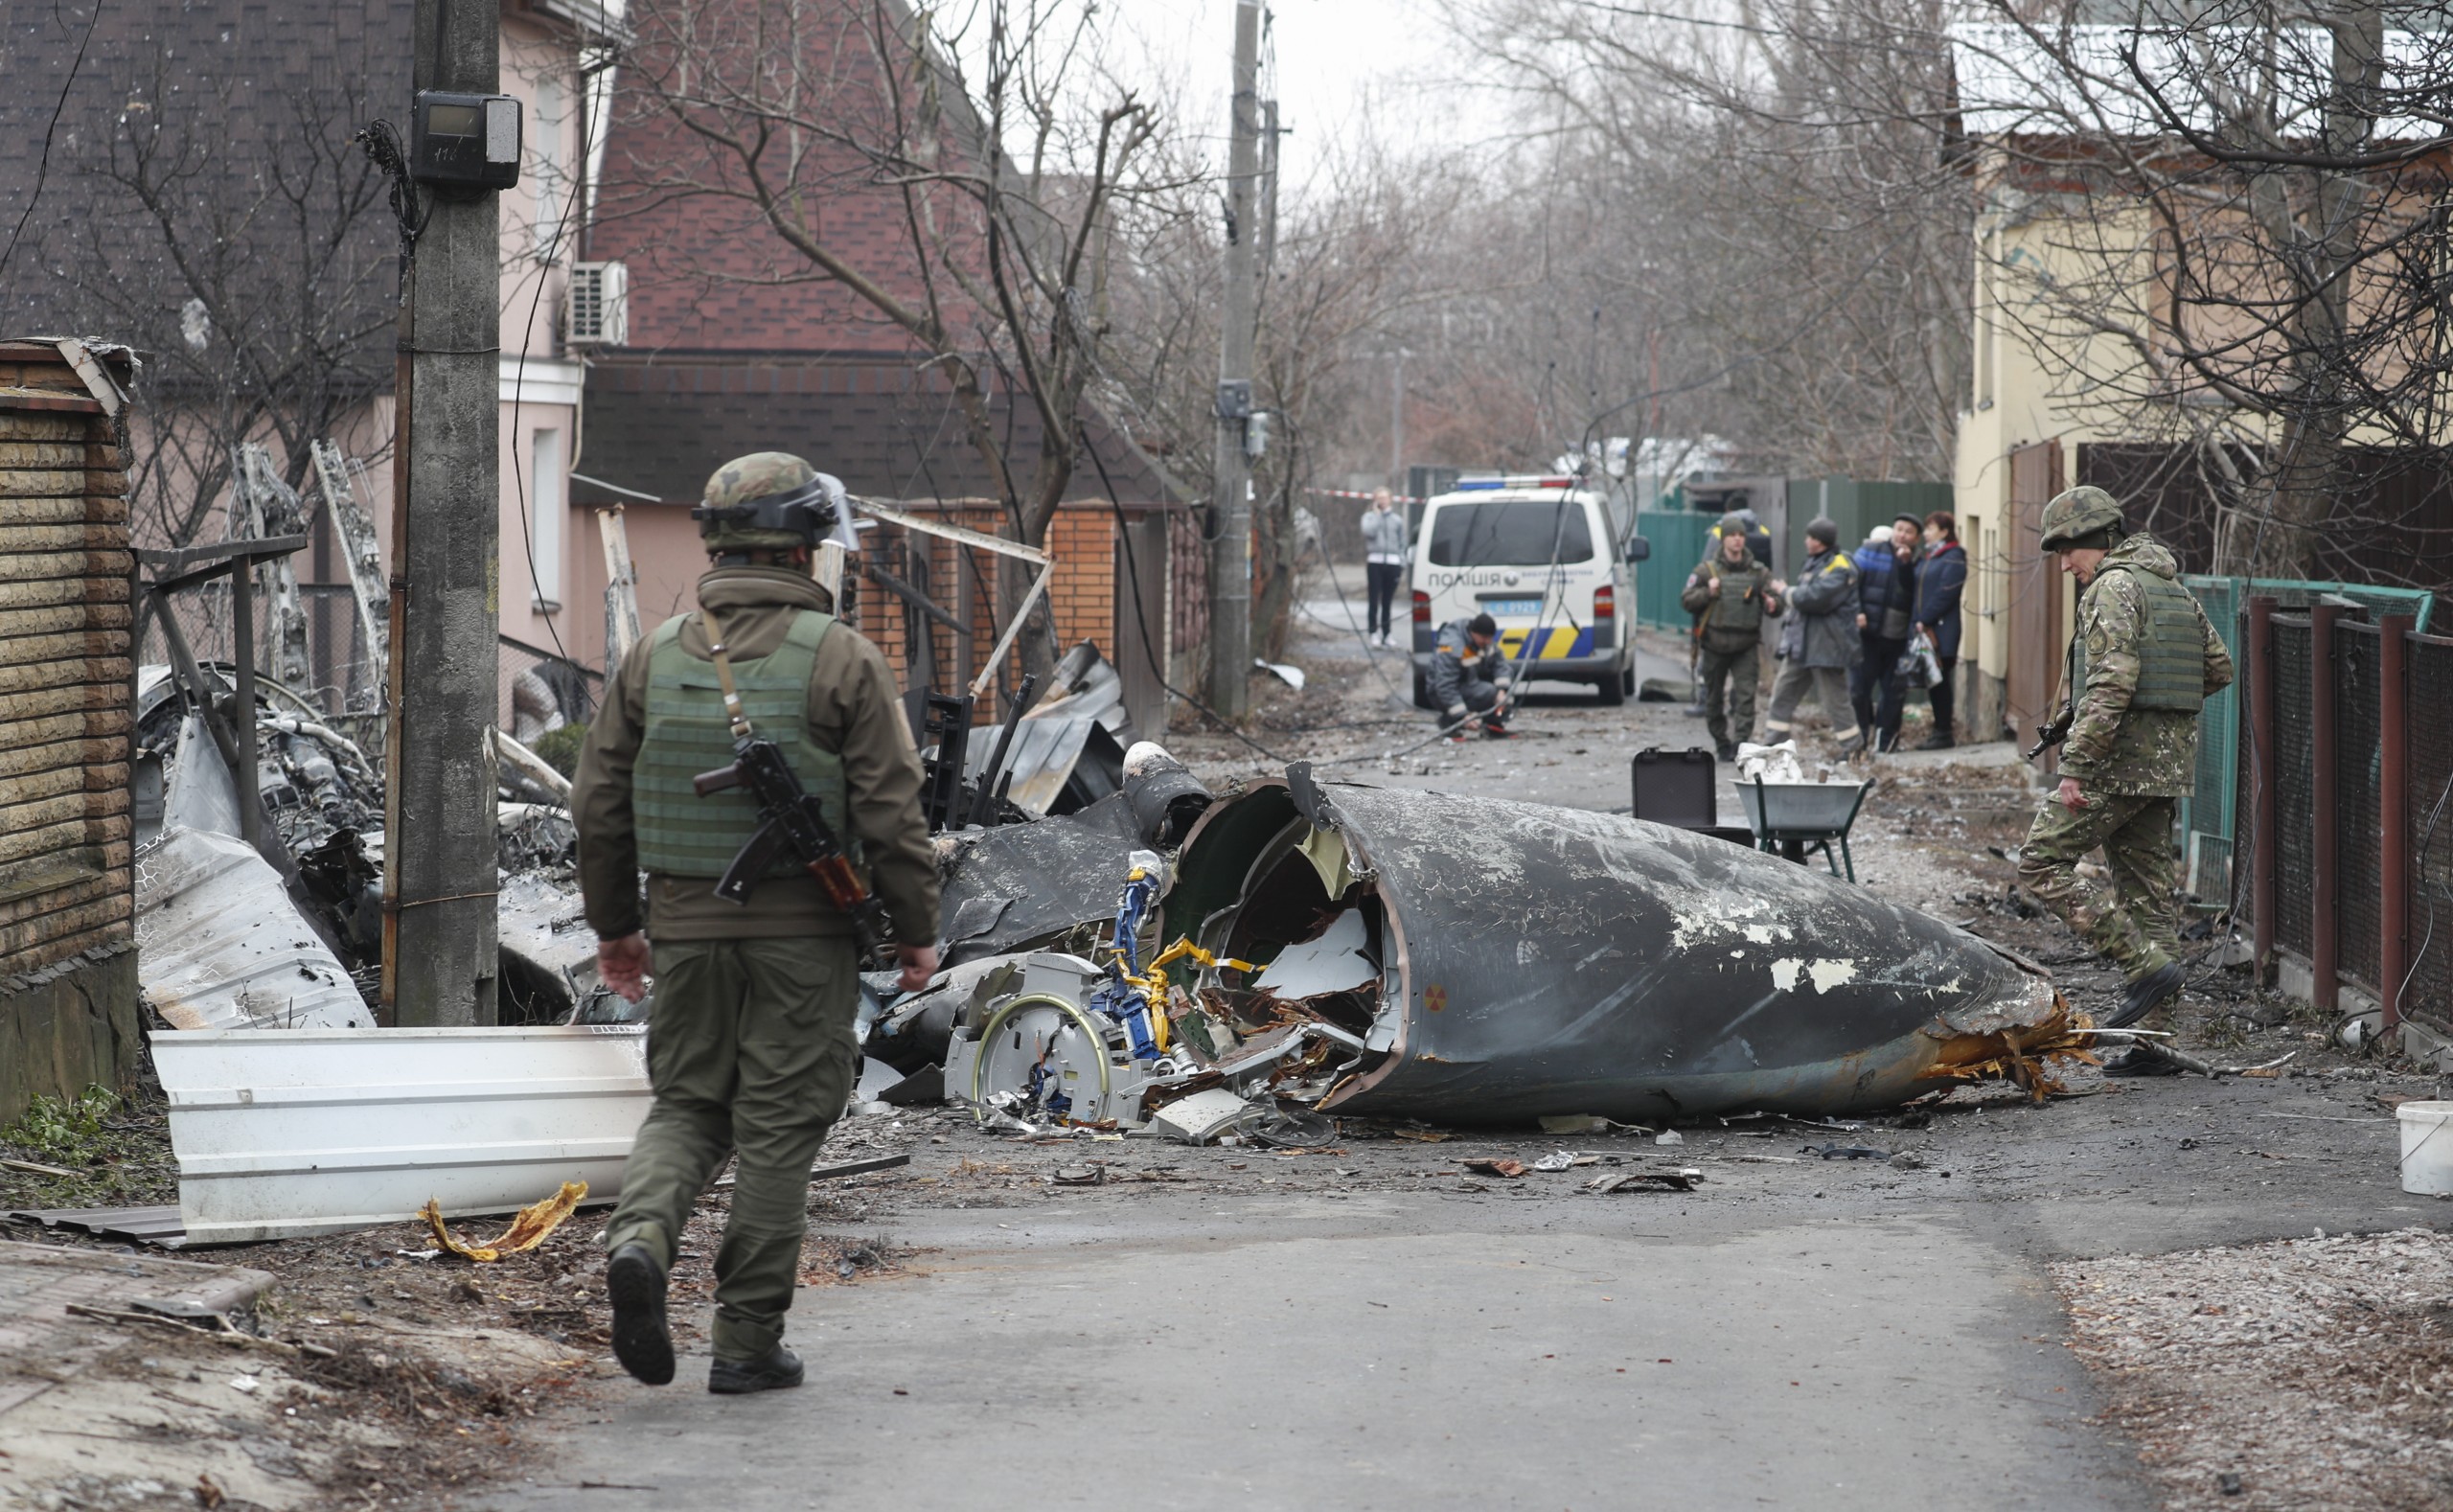 epa09783634 Soldiers look at the debris of a military plane that was shot down overnight in Kiev, Ukraine, 25 February 2022. Russian troops entered Ukraine on 24 February prompting the country's president to declare martial law.  EPA/SERGEY DOLZHENKO